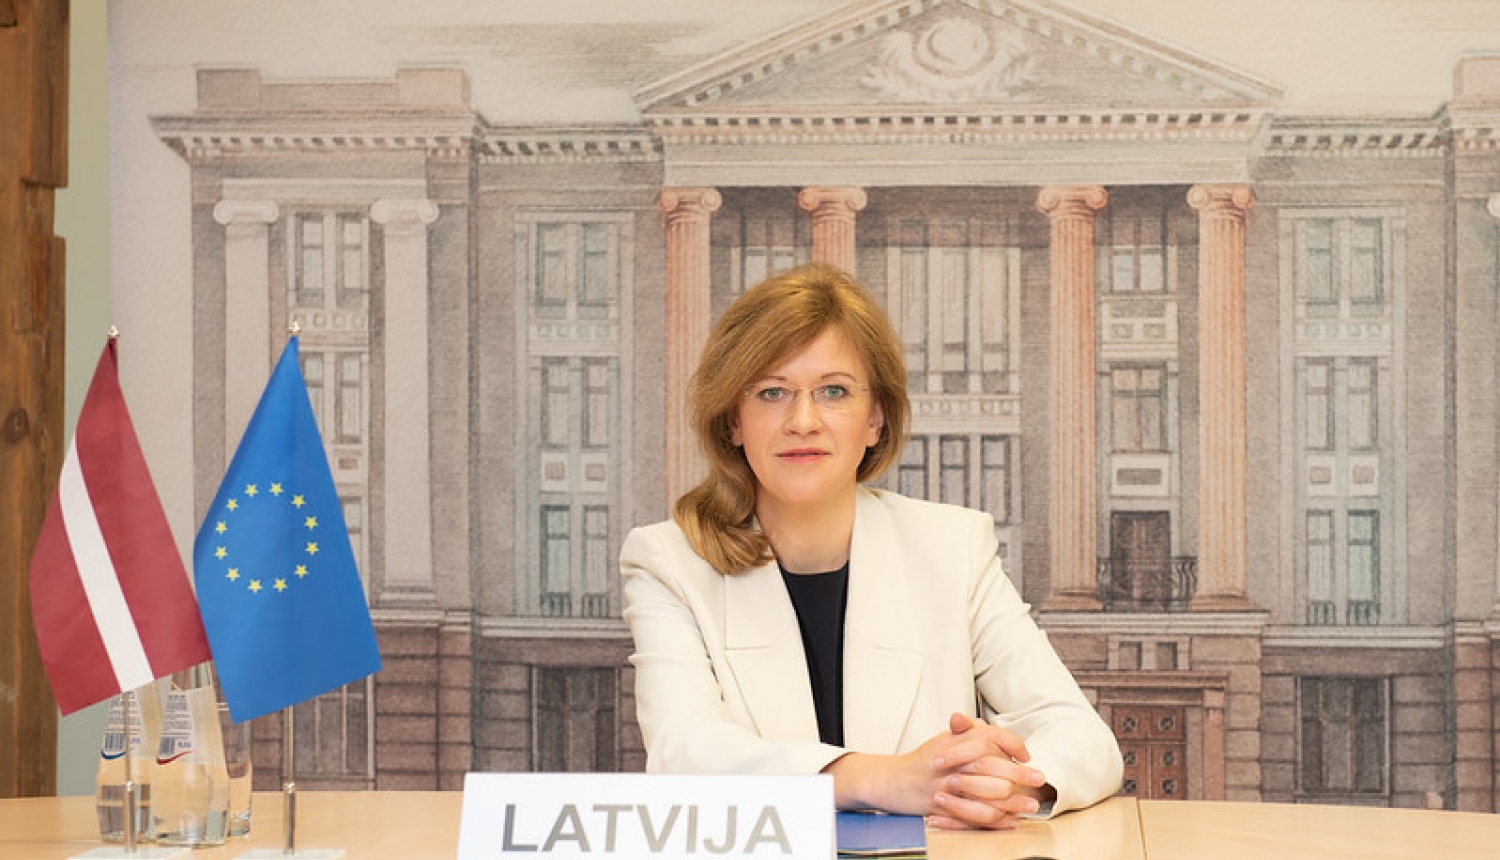 Parliamentary Secretary Zanda Kalniņa-Lukaševica: for a well-functioning free market, the easing of restrictions on travel and trade has to be ensured